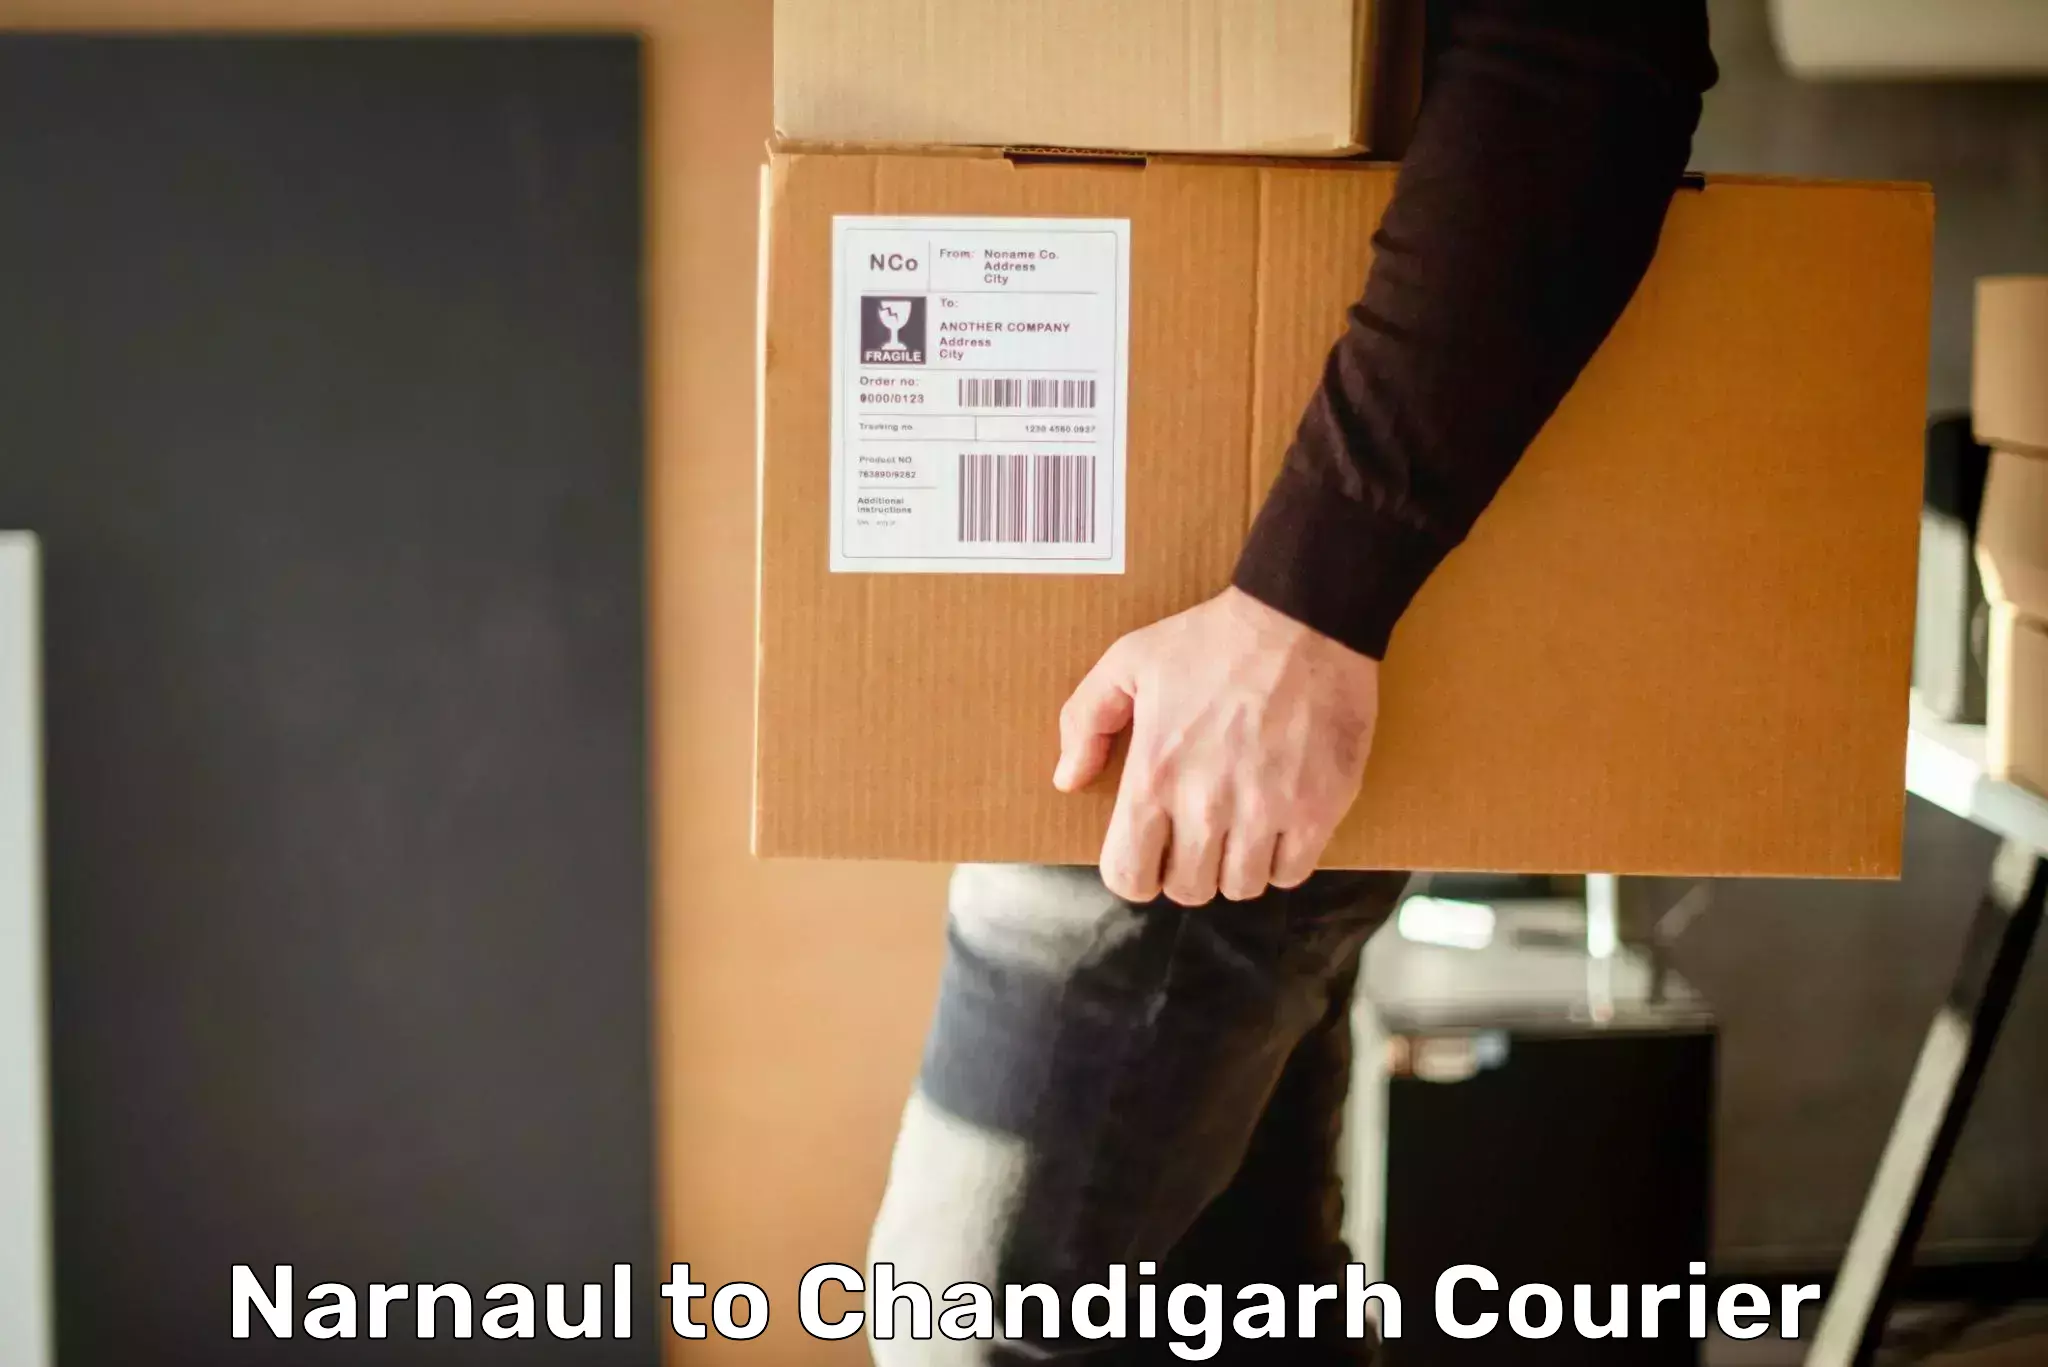 Cash on delivery service Narnaul to Chandigarh